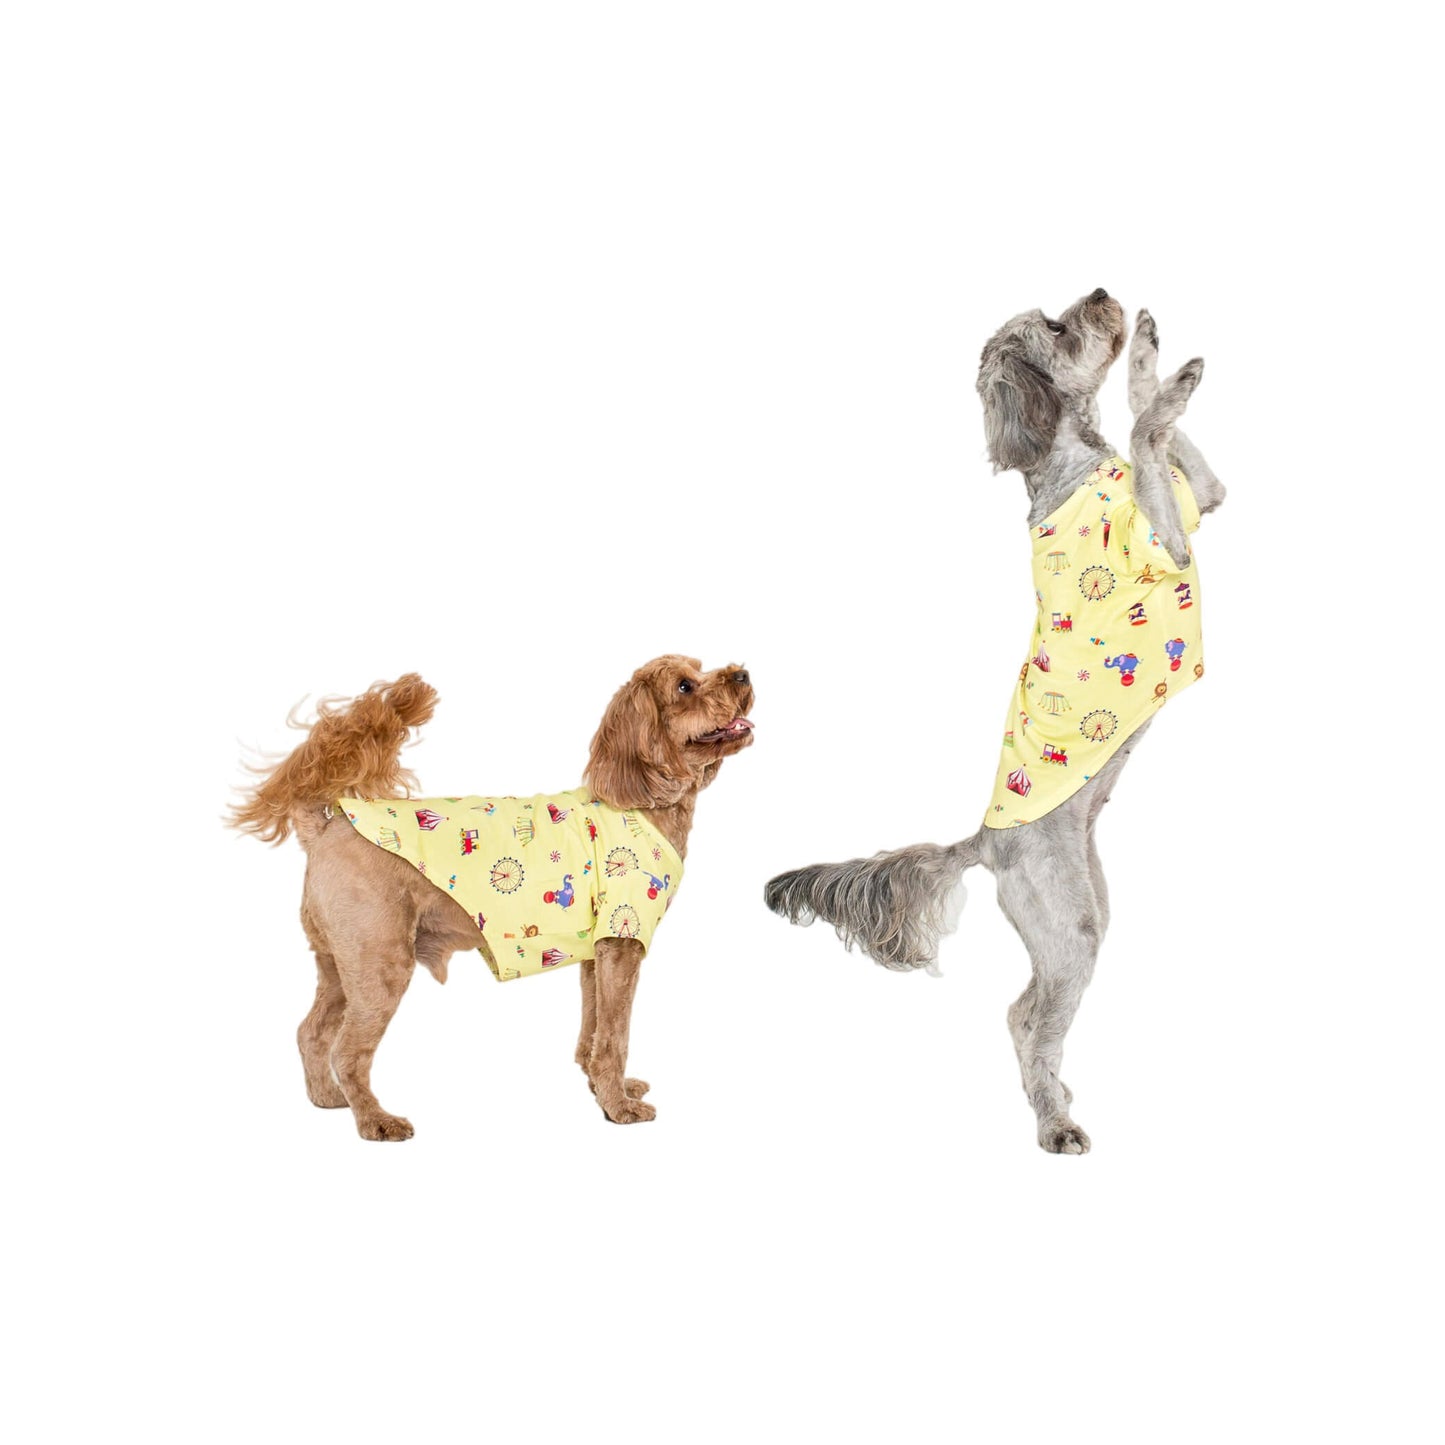 Two Cavoodles standing on hind legs  wearing a Vibrant Hound Admit one dog shirt. It has carnival theme printed on the dog clothing.